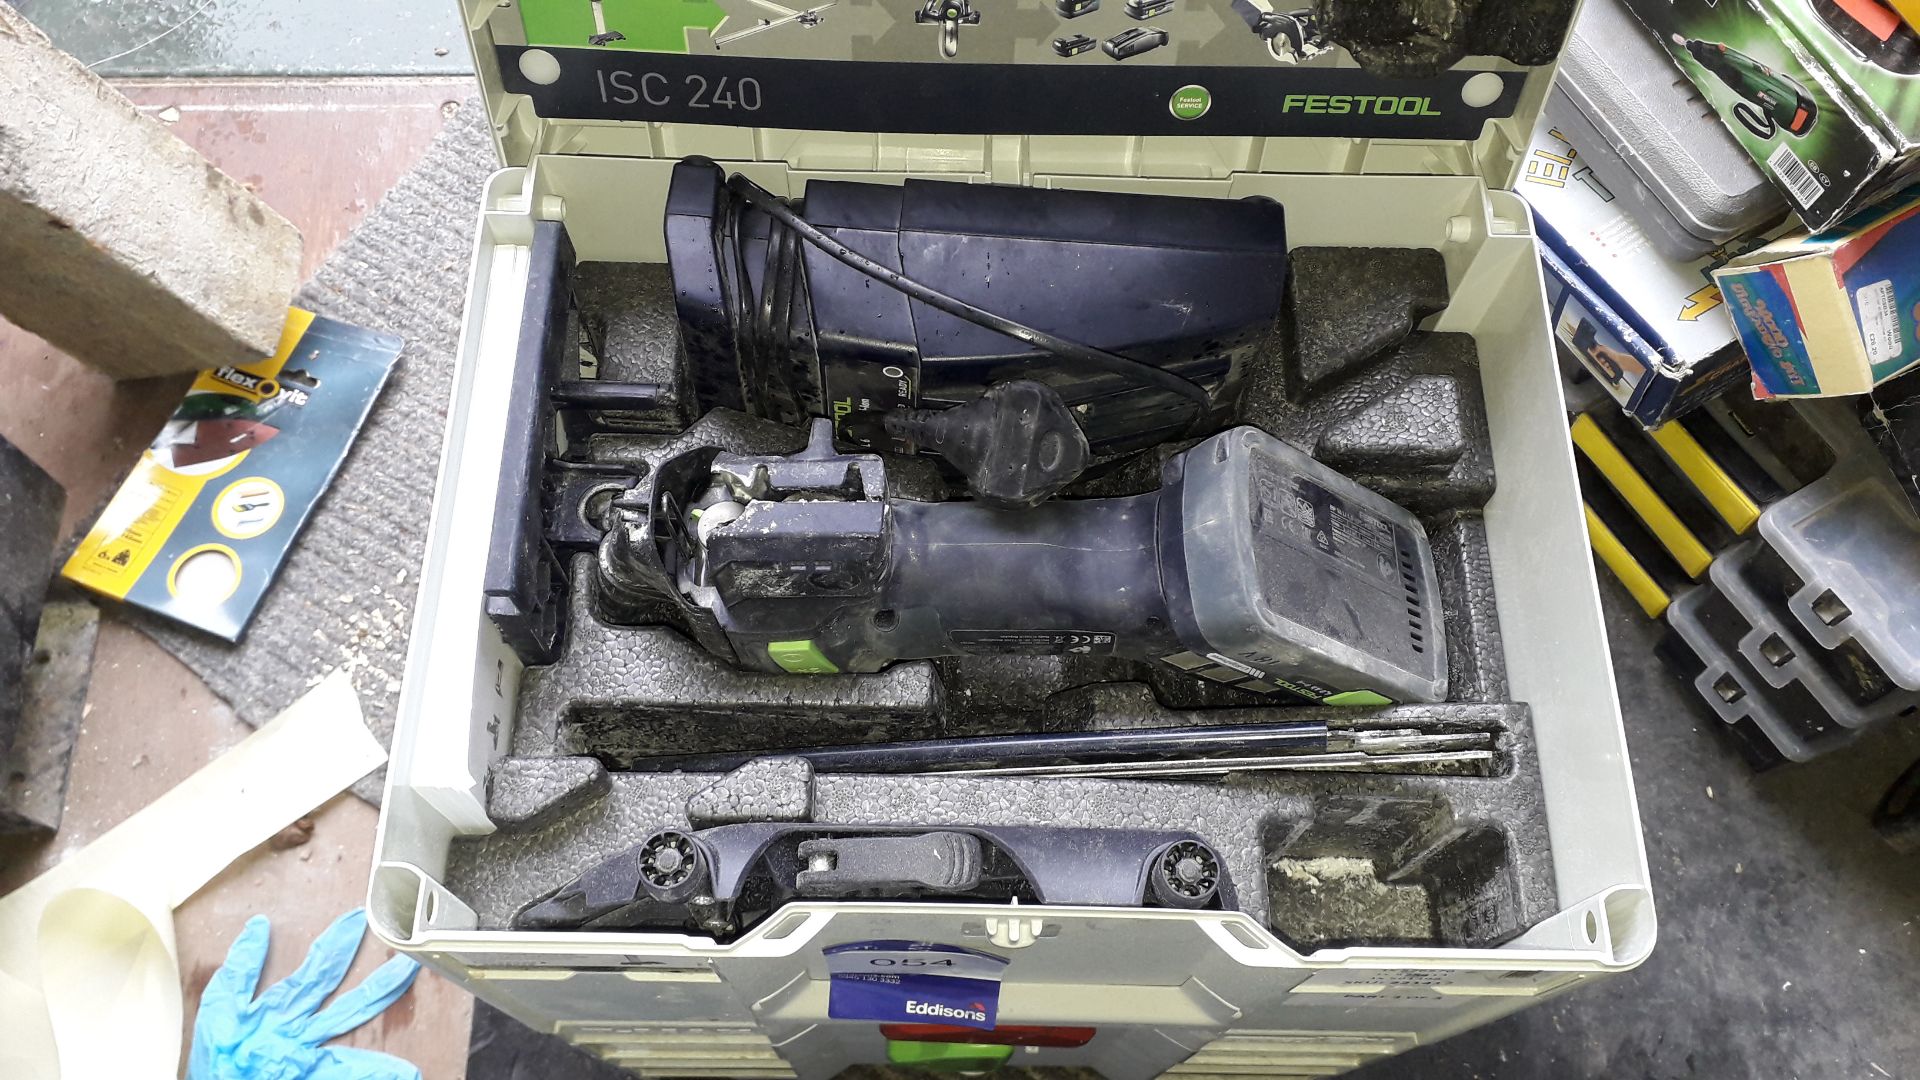 Festool ISC 240 Cordless Insulating Material Saw